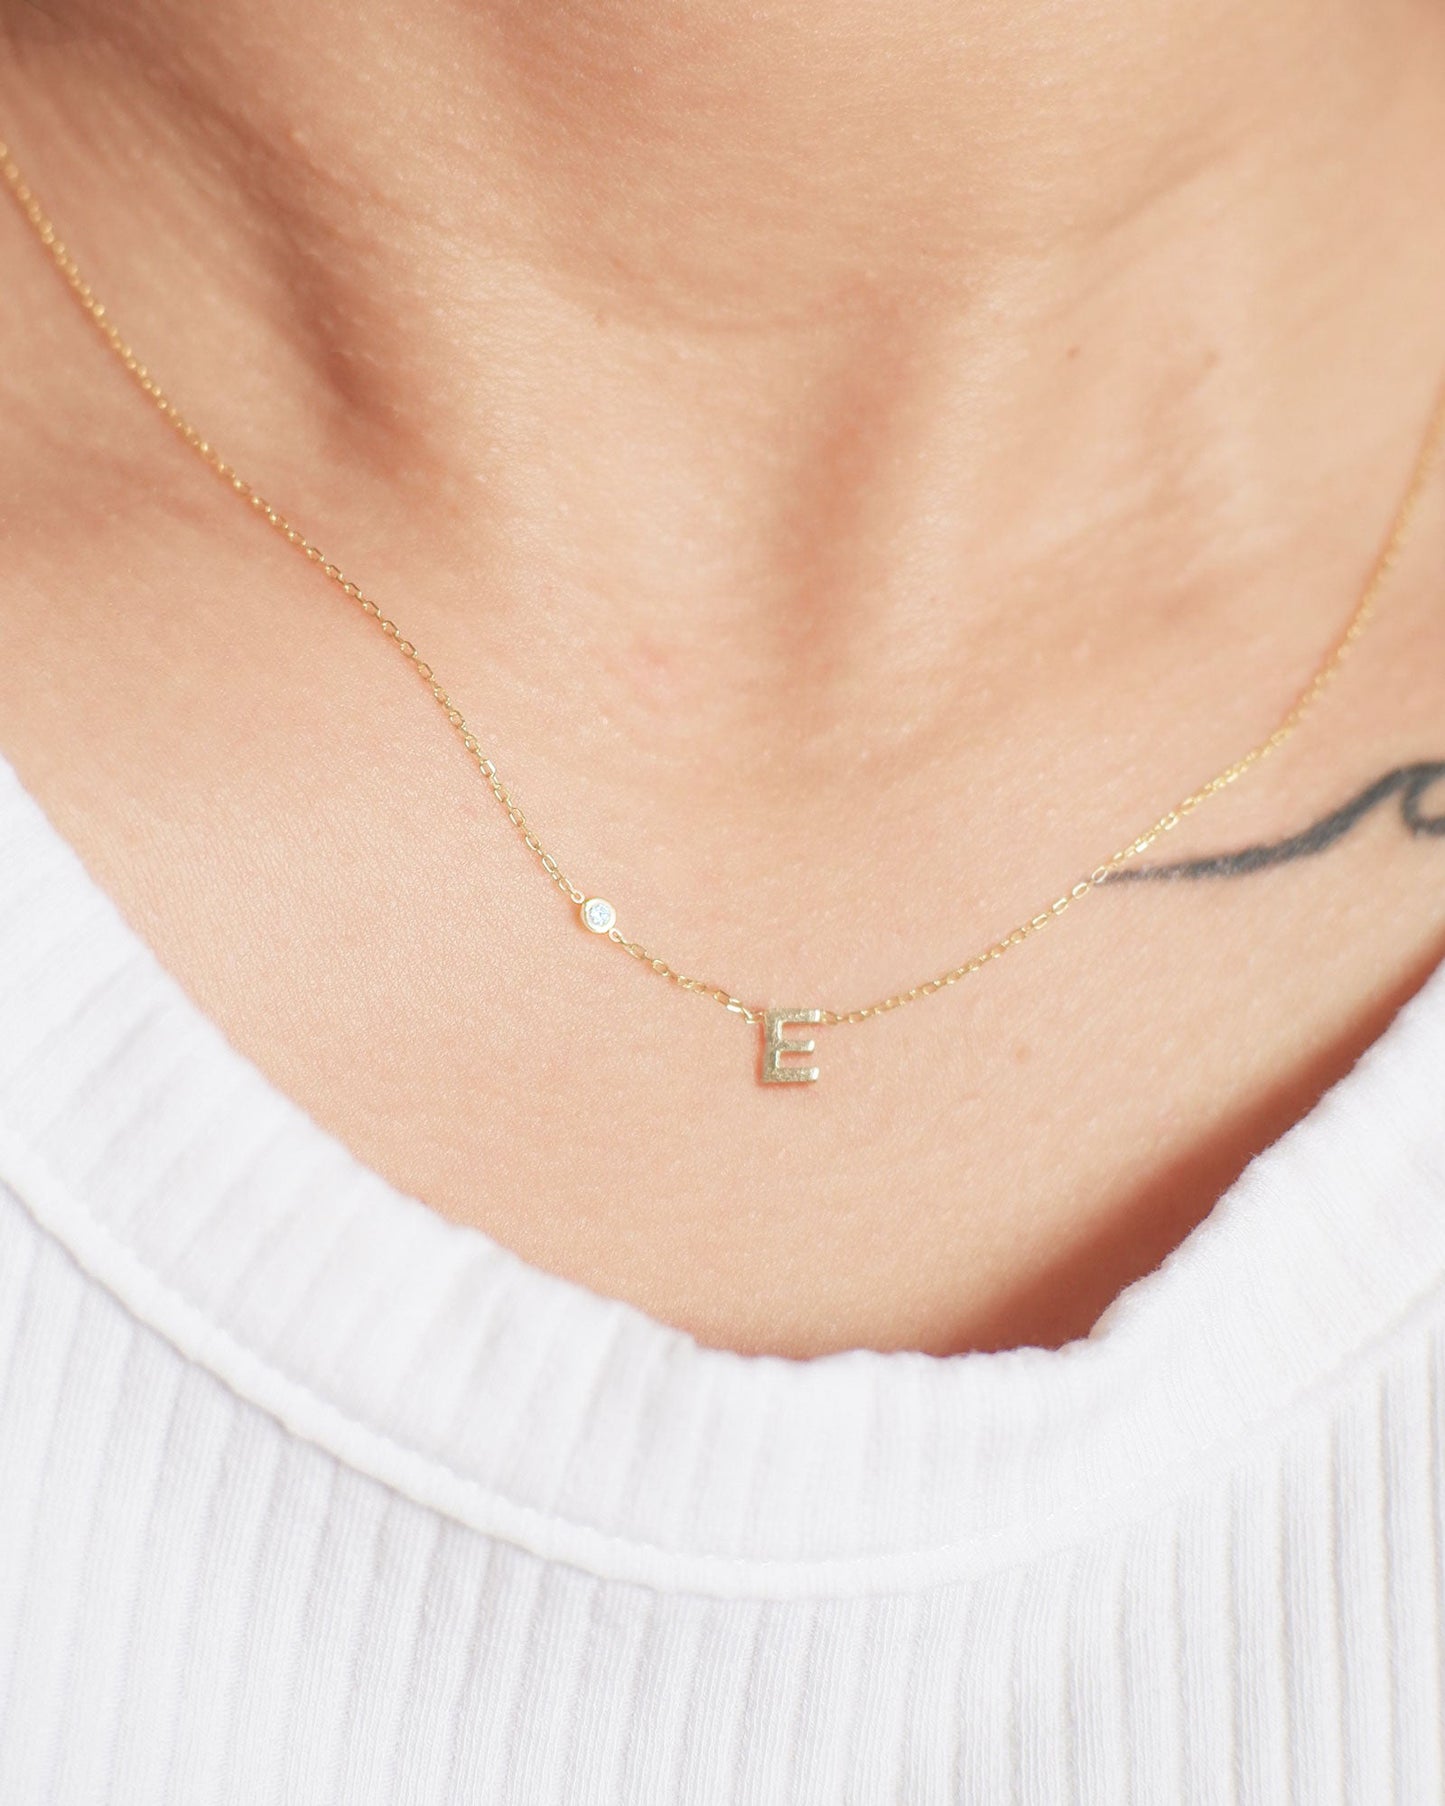 The Diamond Initial Necklace in Solid Gold